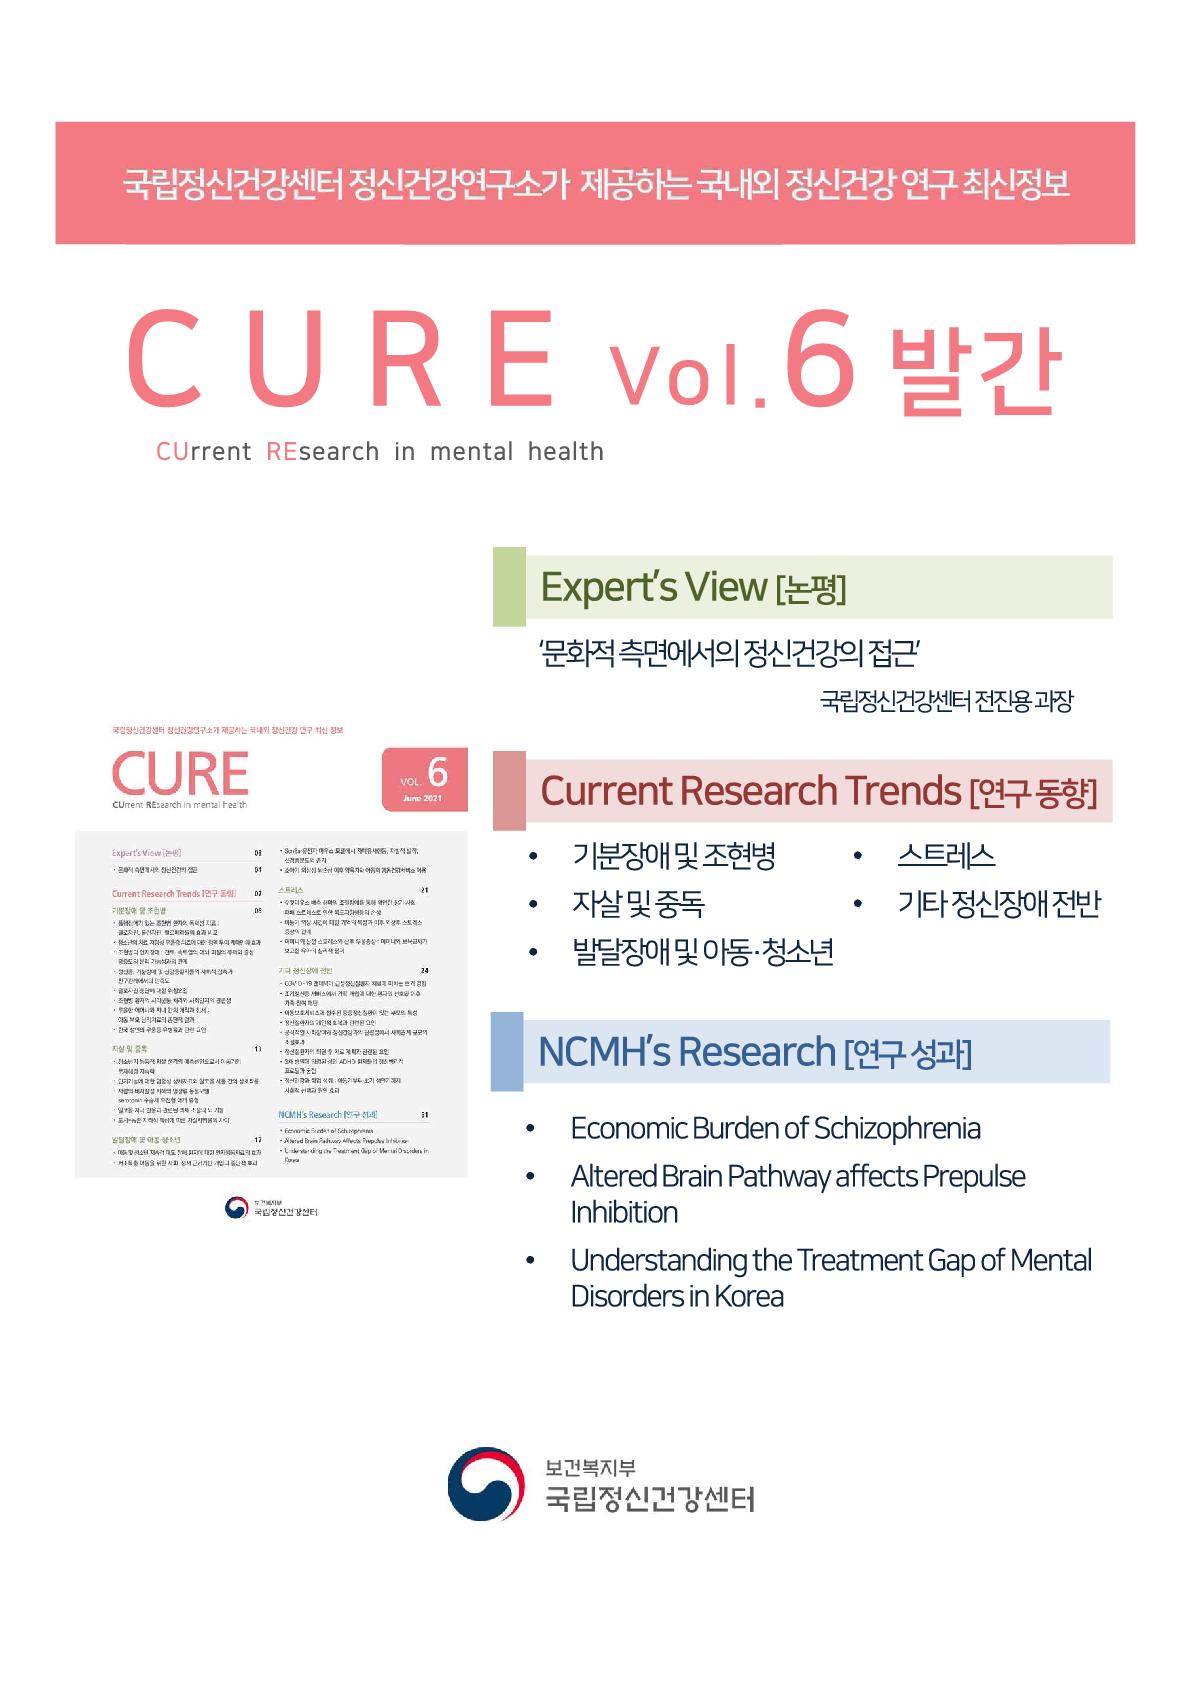 CURE(CUrrent REsearch in mental health) Vol.6 발간